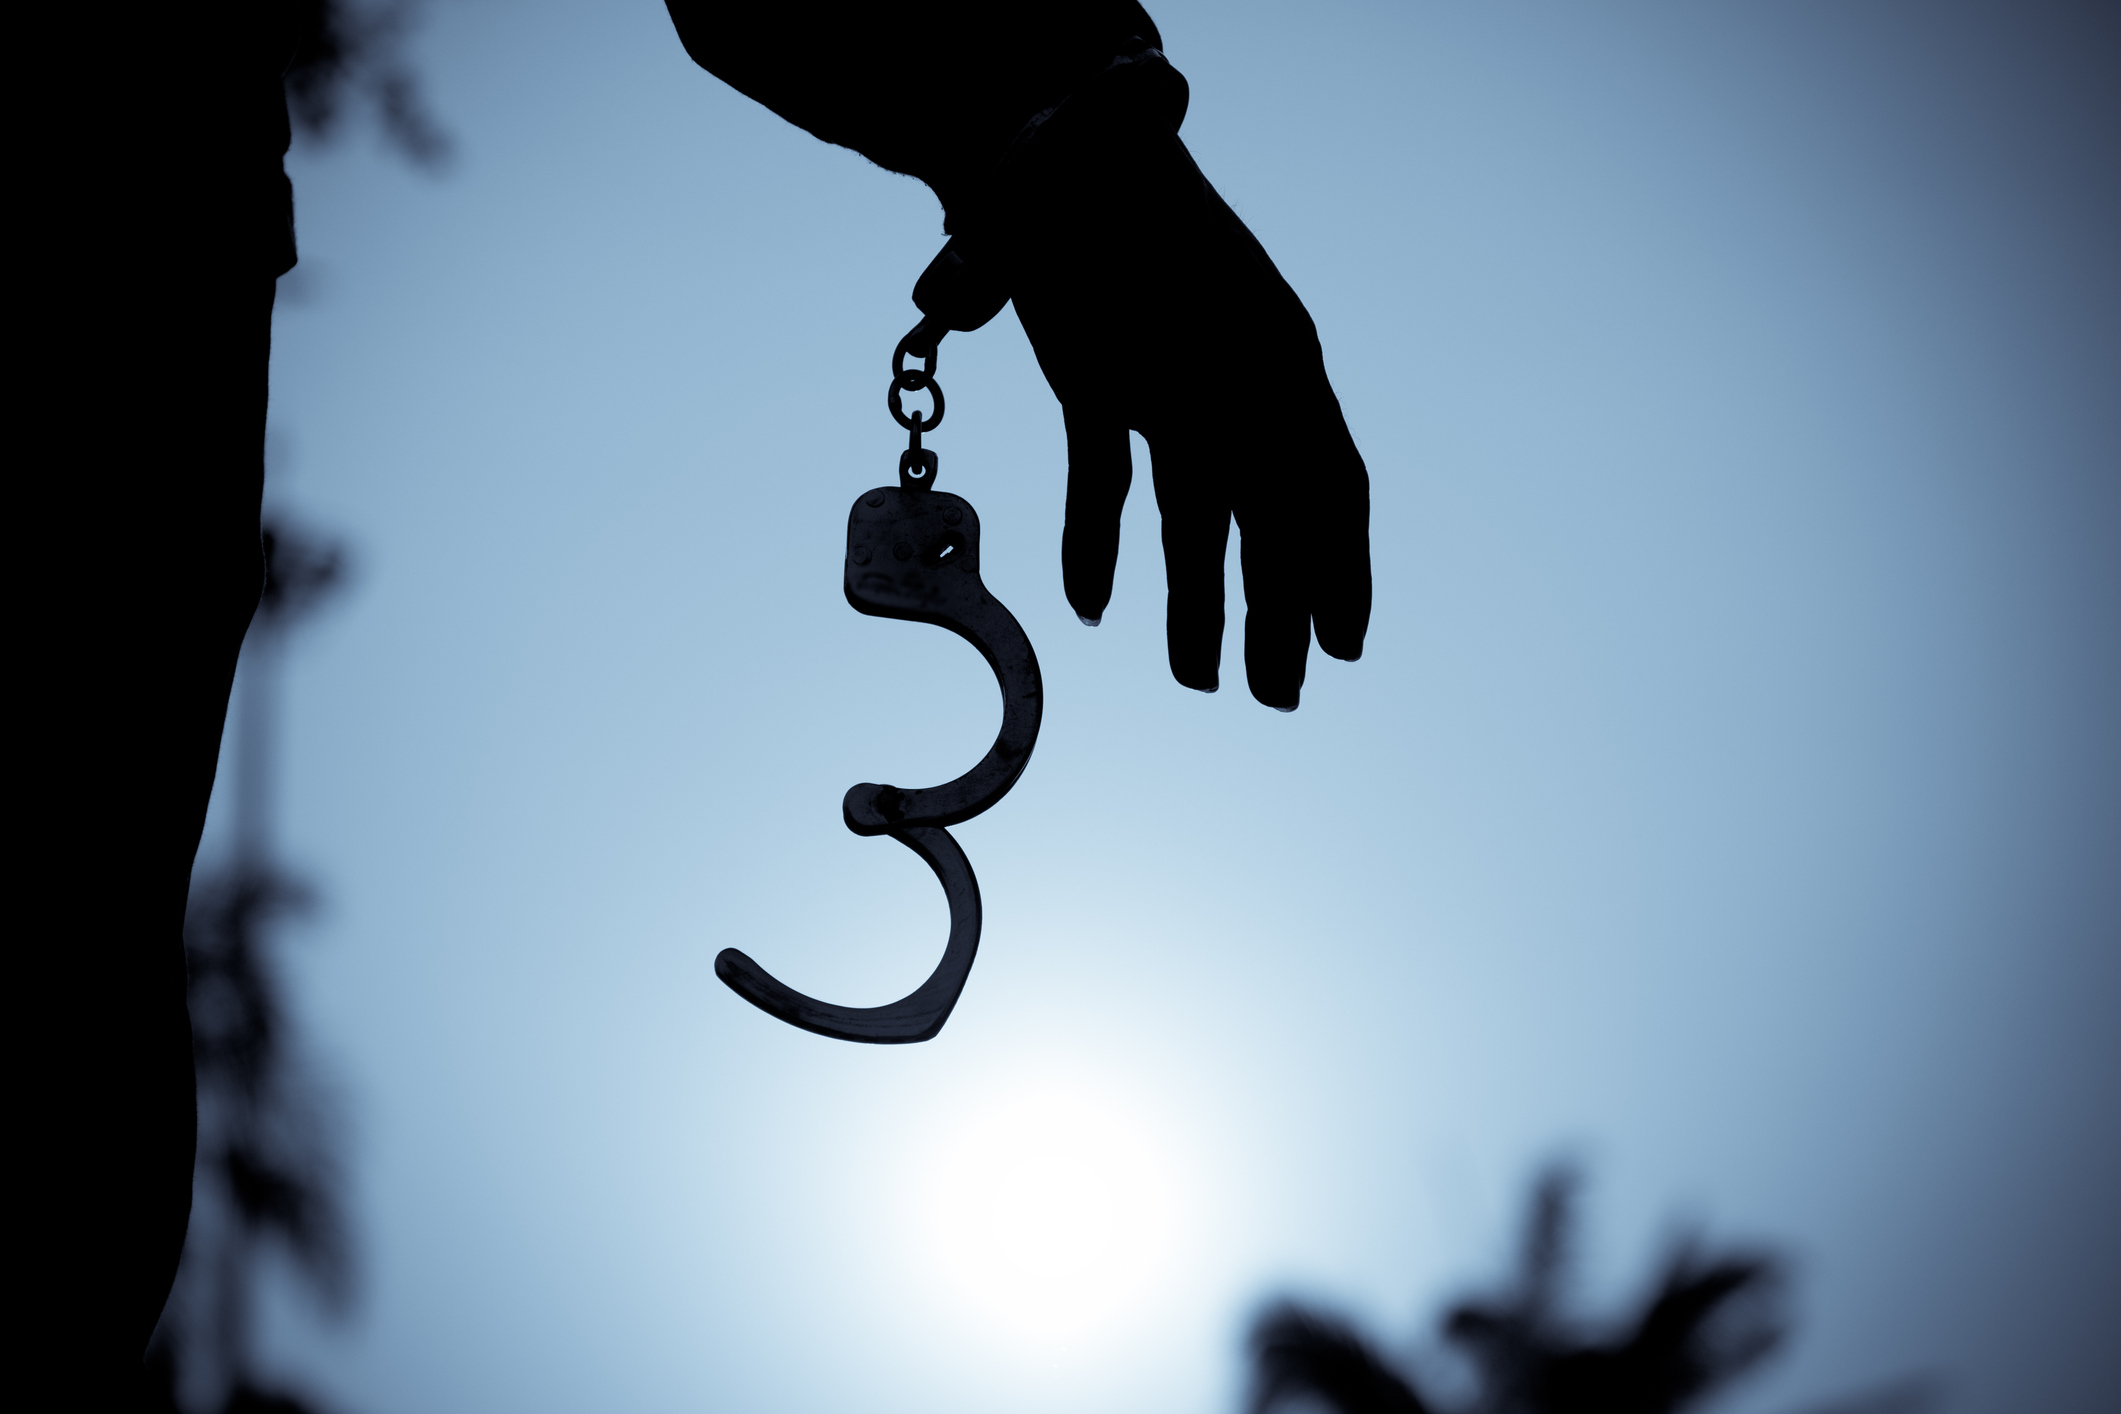 A hand with handcuffs hanging from it